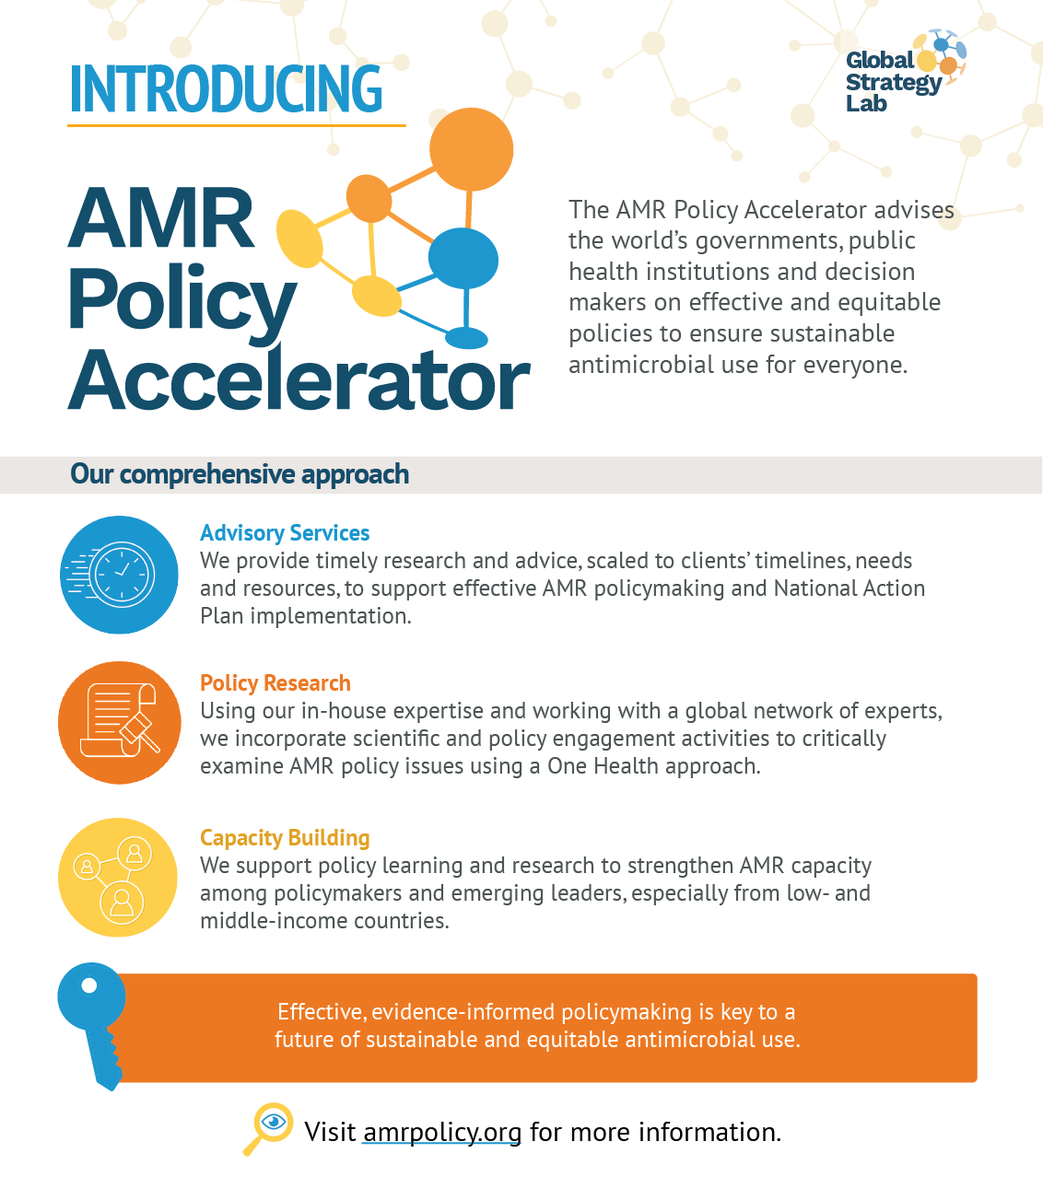 To learn more about the AMR Policy Accelerator, follow #AMRpolicy for the next few weeks as we share our mission, approach and how we support evidence-informed AMR policymaking 🔎 Visit us at 🔖 amrpolicy.org